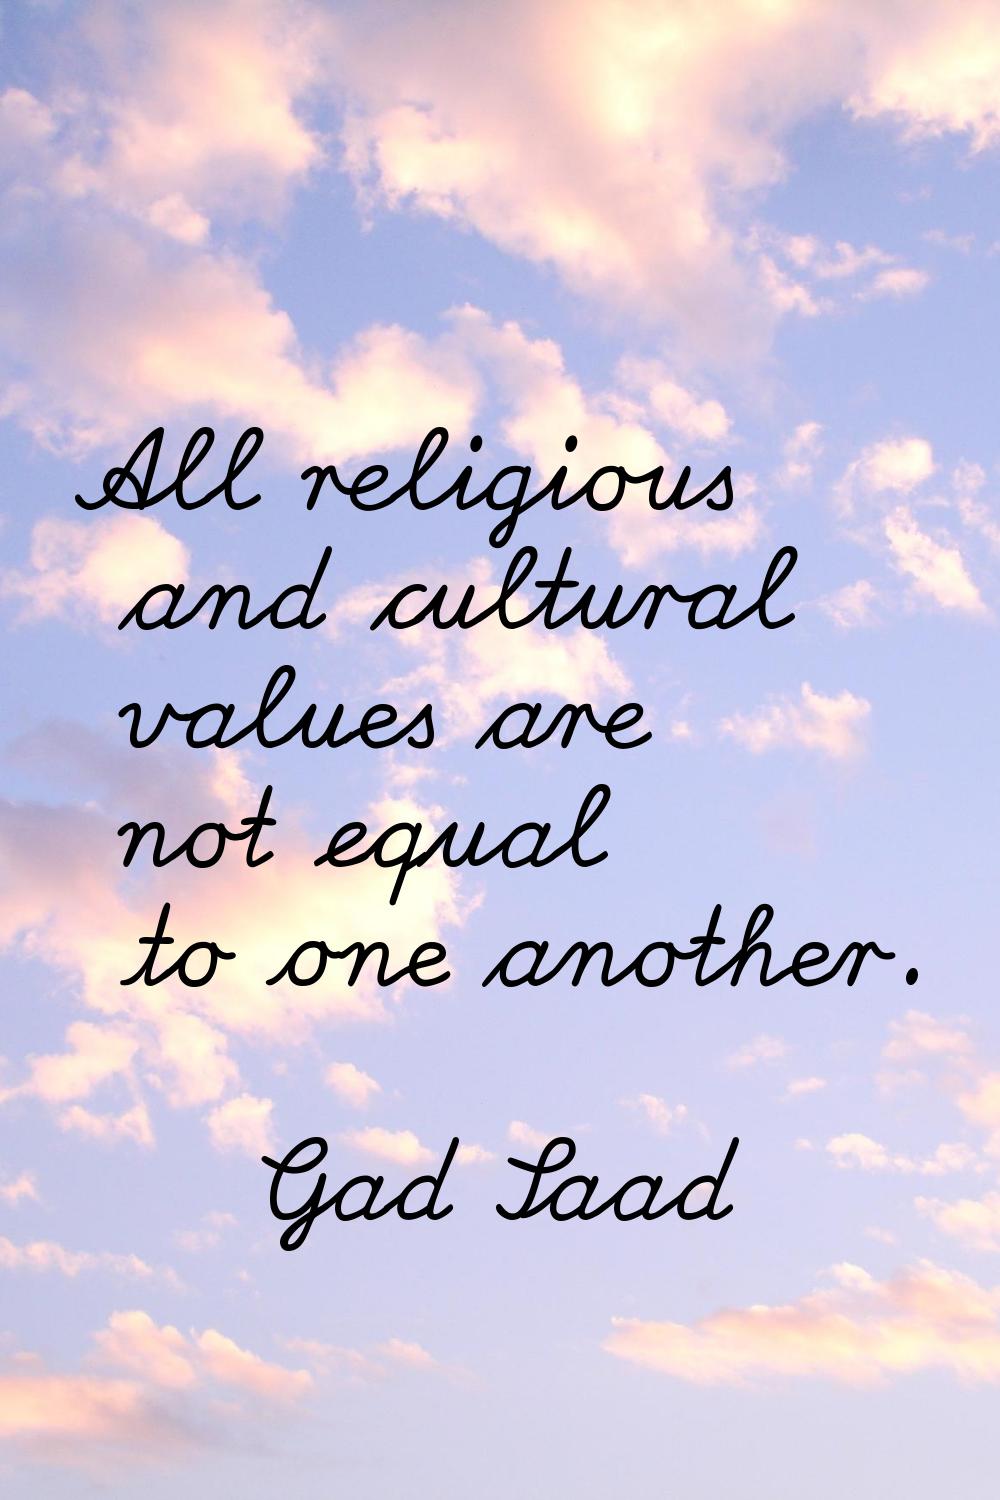 All religious and cultural values are not equal to one another.